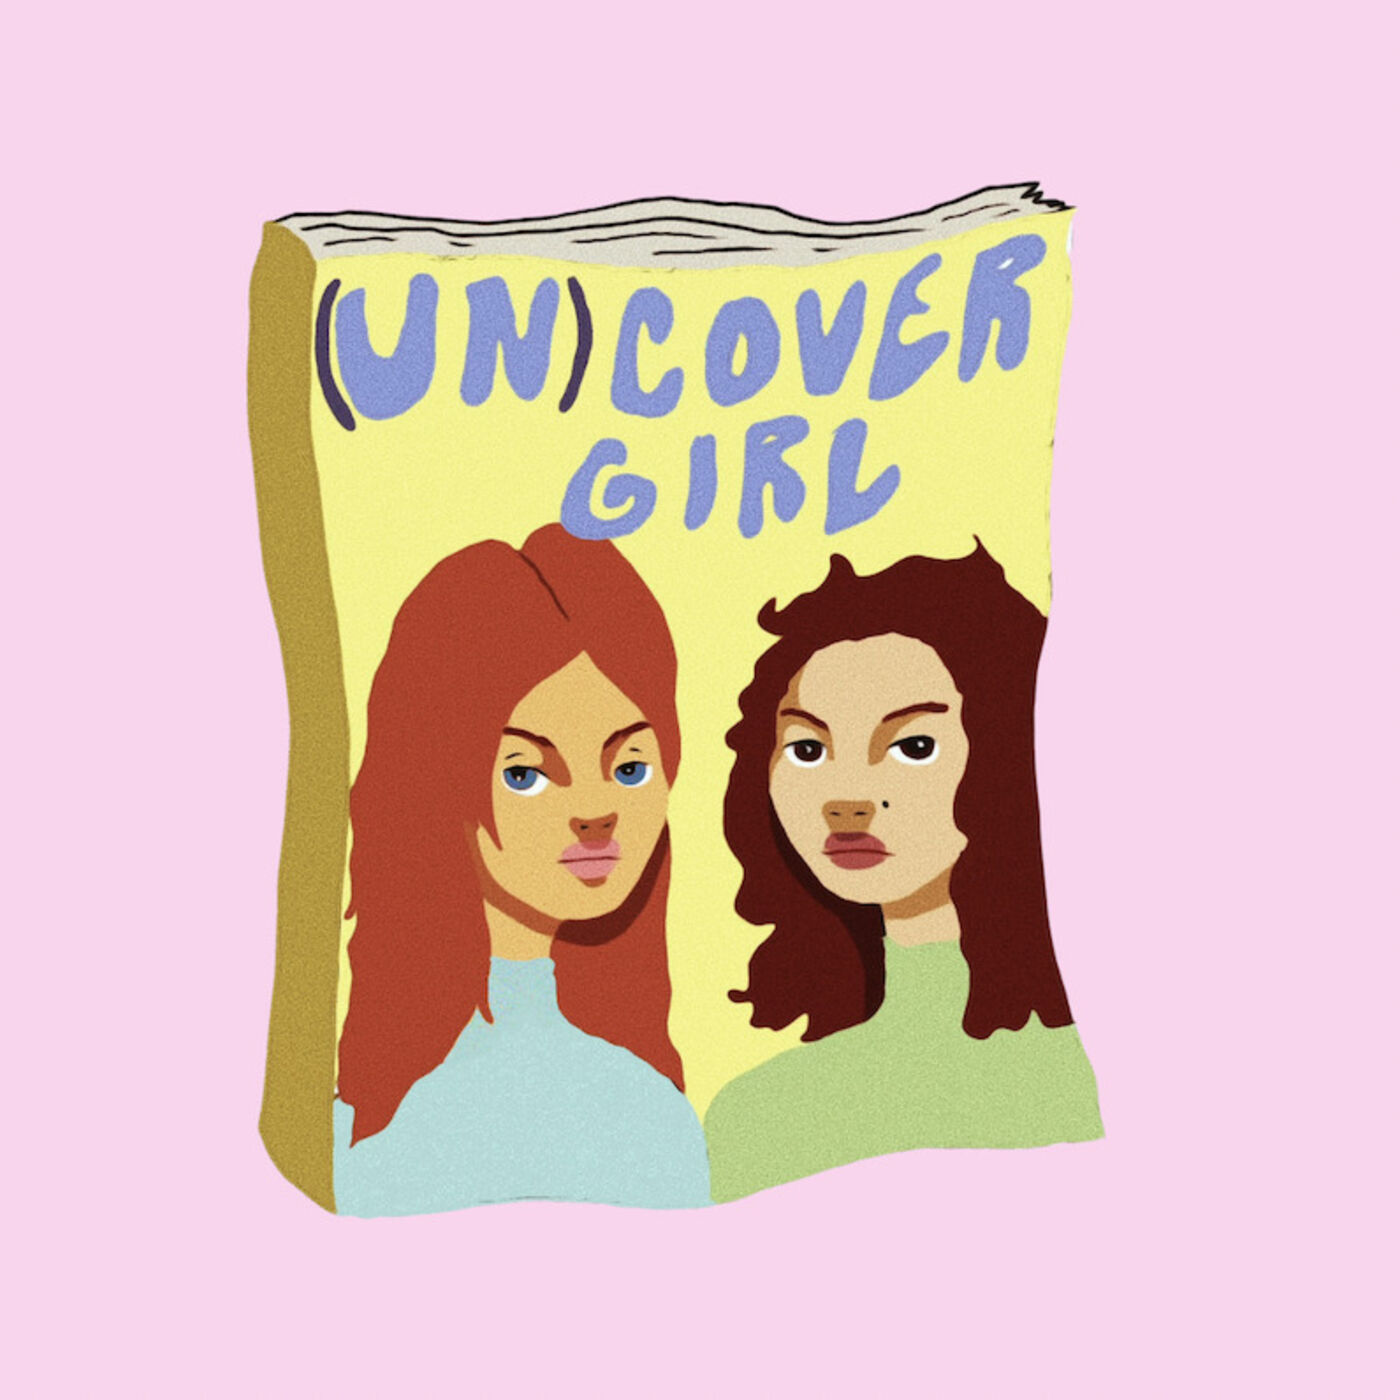 (UN)COVER GIRL podcast show image